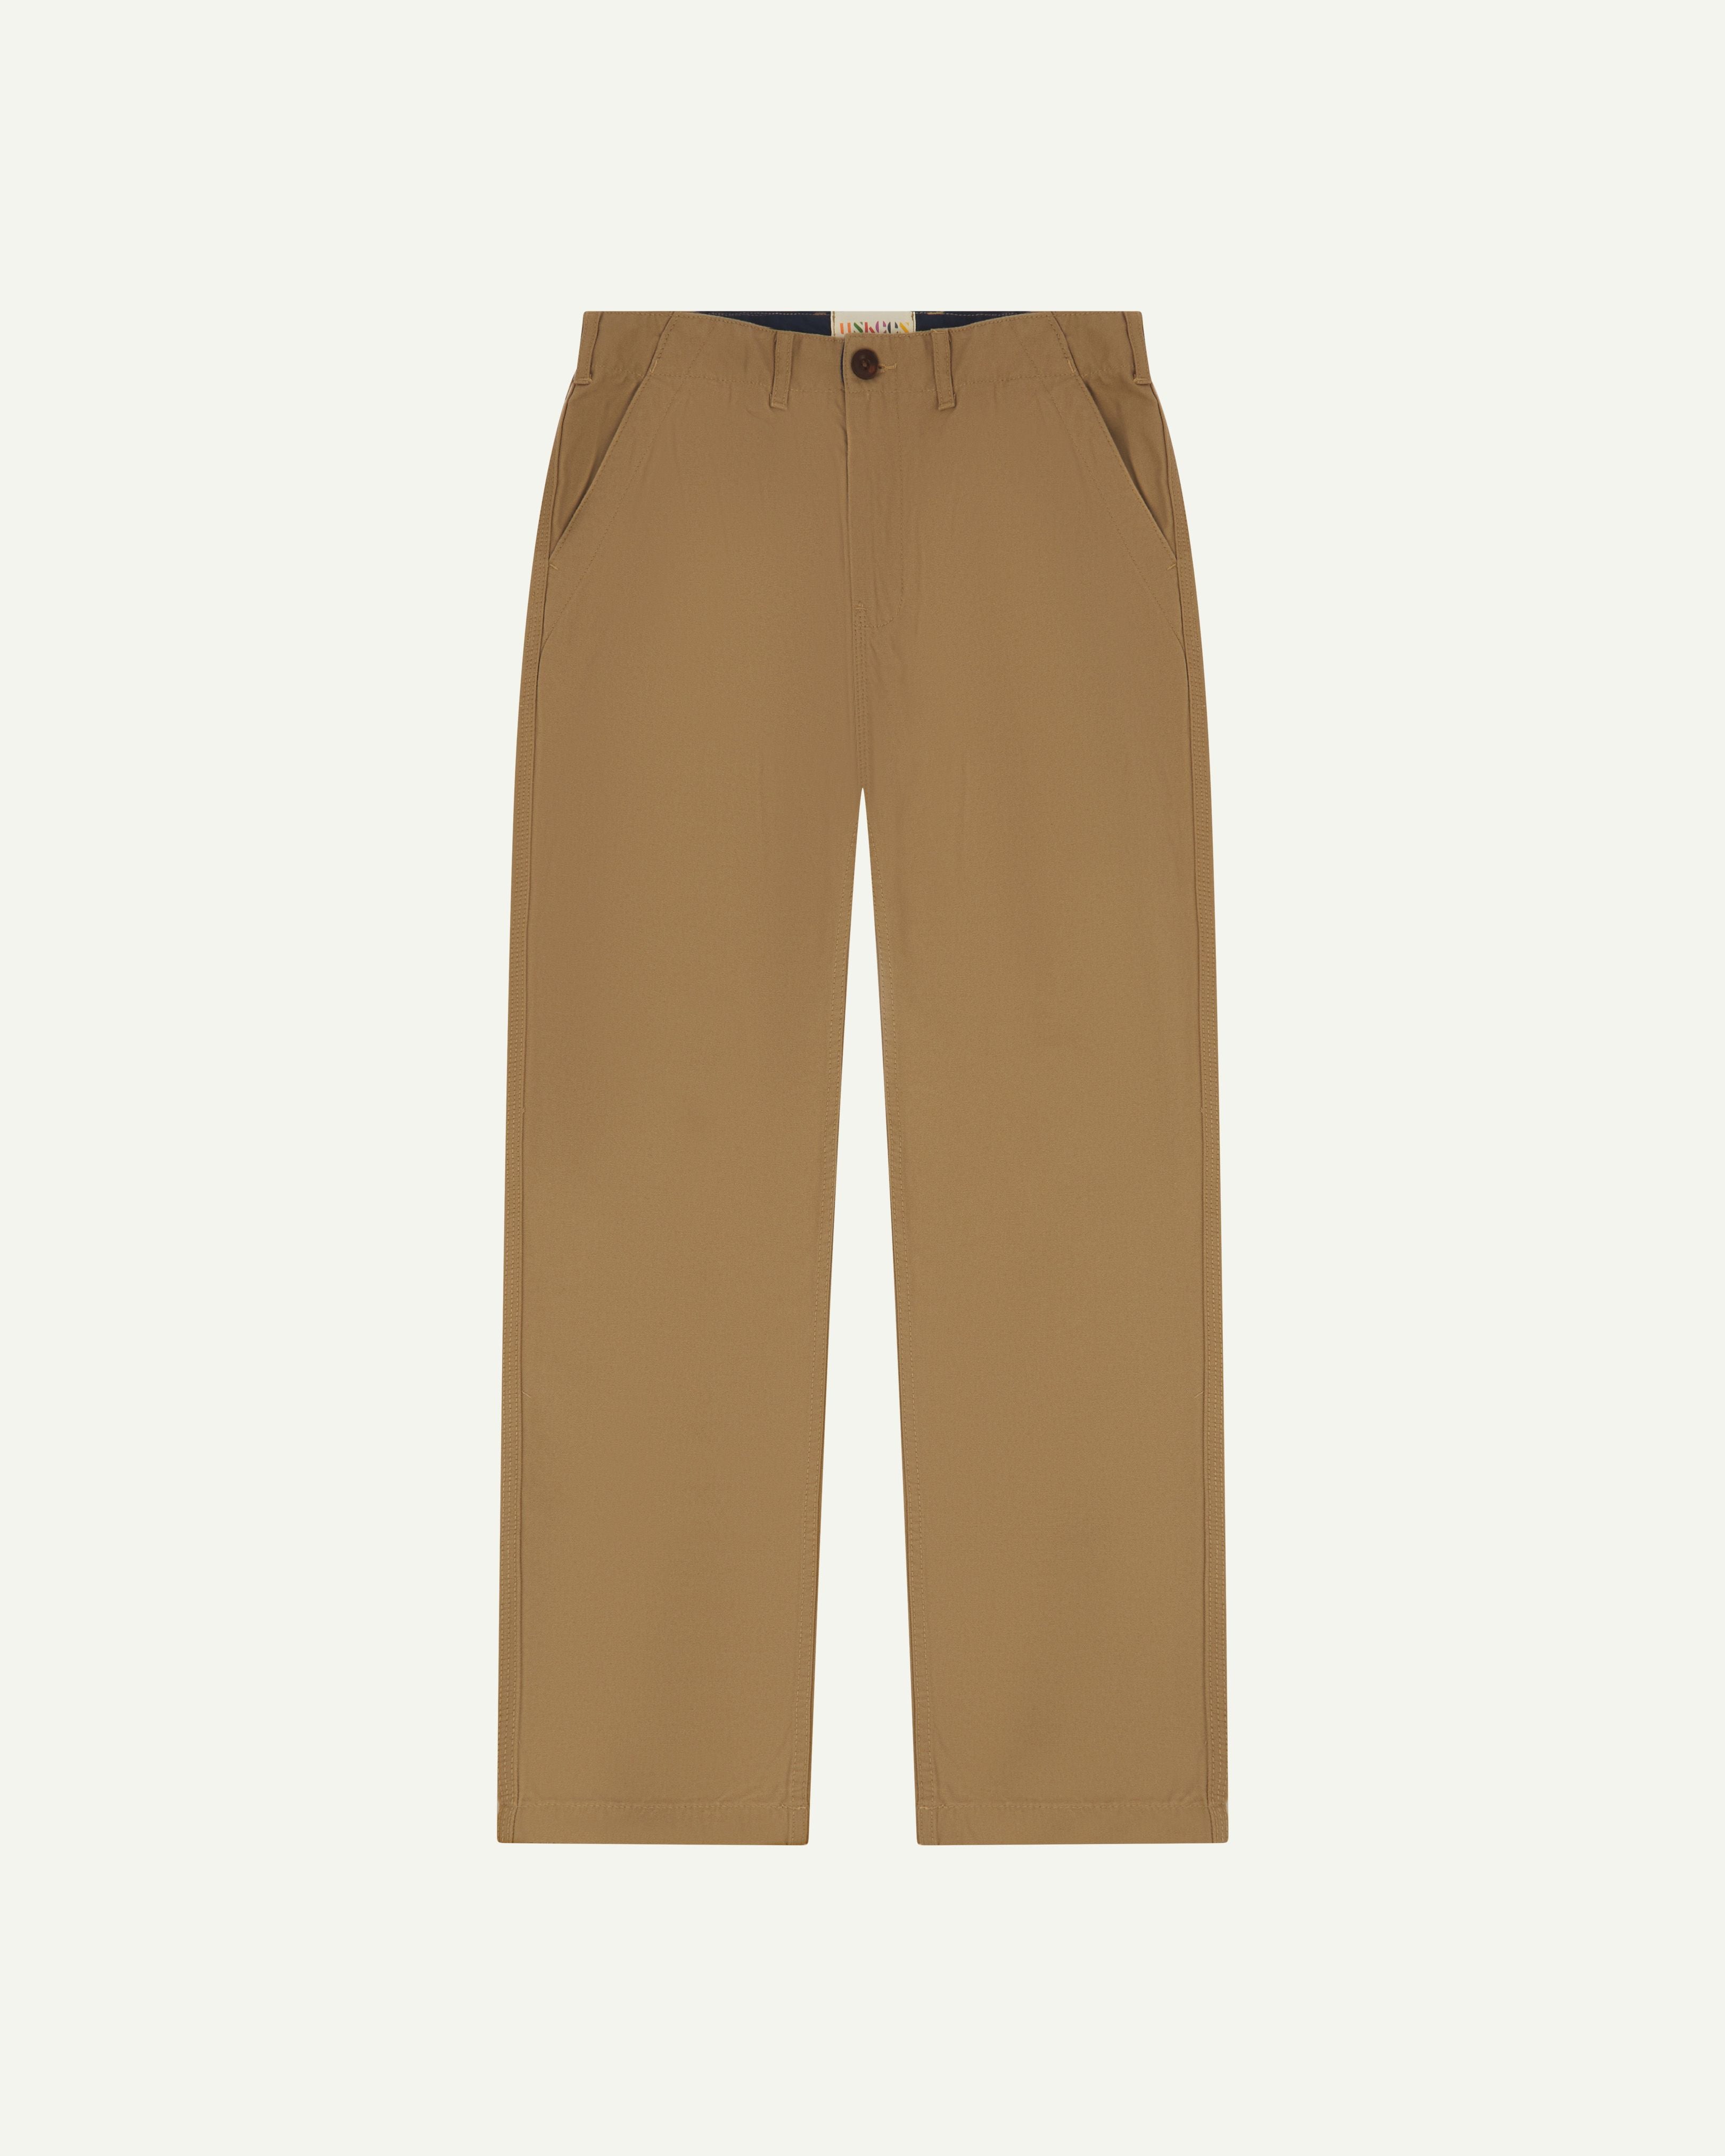 Front flat shot of #5005 Uskees men's organic cotton khaki casual trousers. on white background